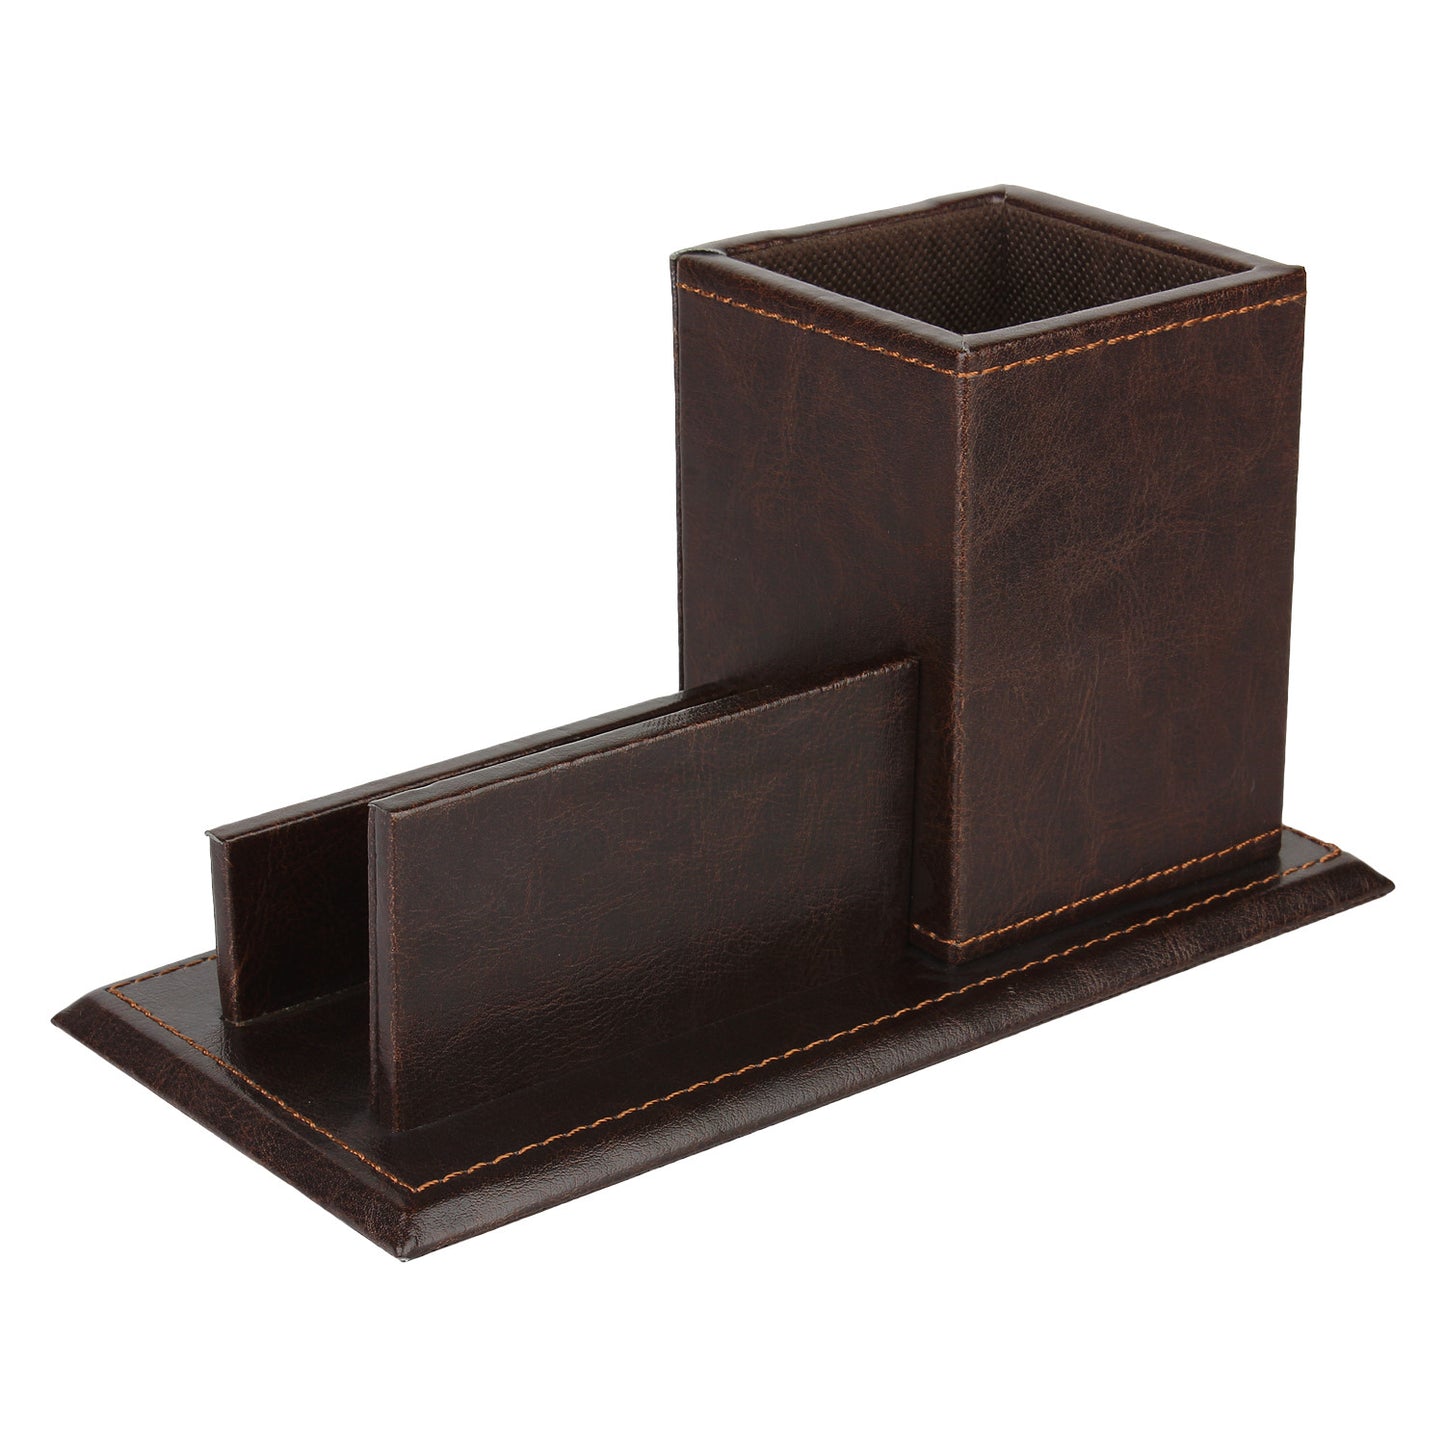 Brown Pen Holder along with a visiting card holder